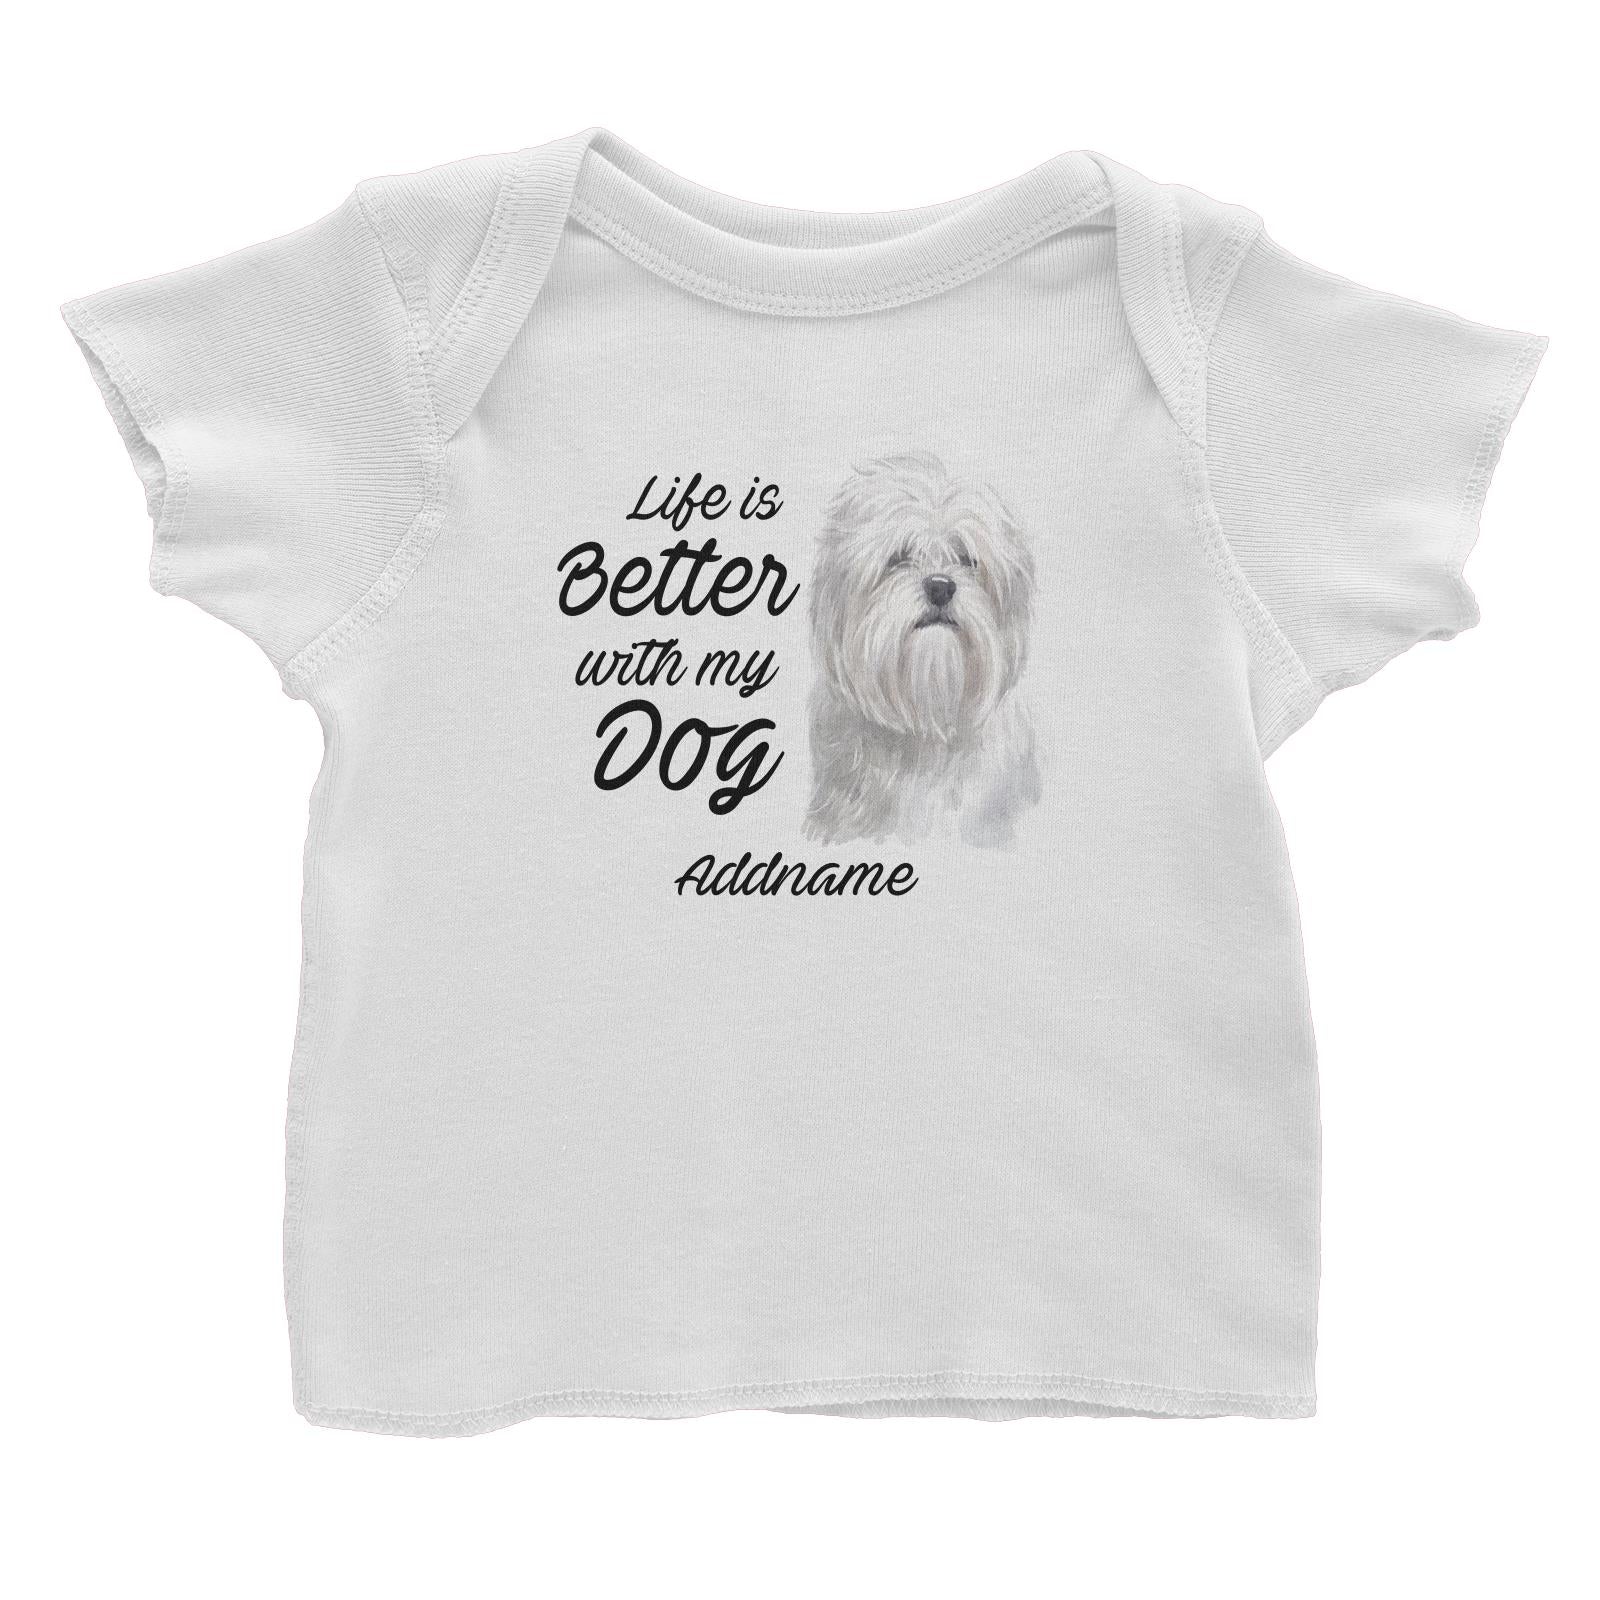 Watercolor Life is Better With My Dog Lhasa Apso Addname Baby T-Shirt